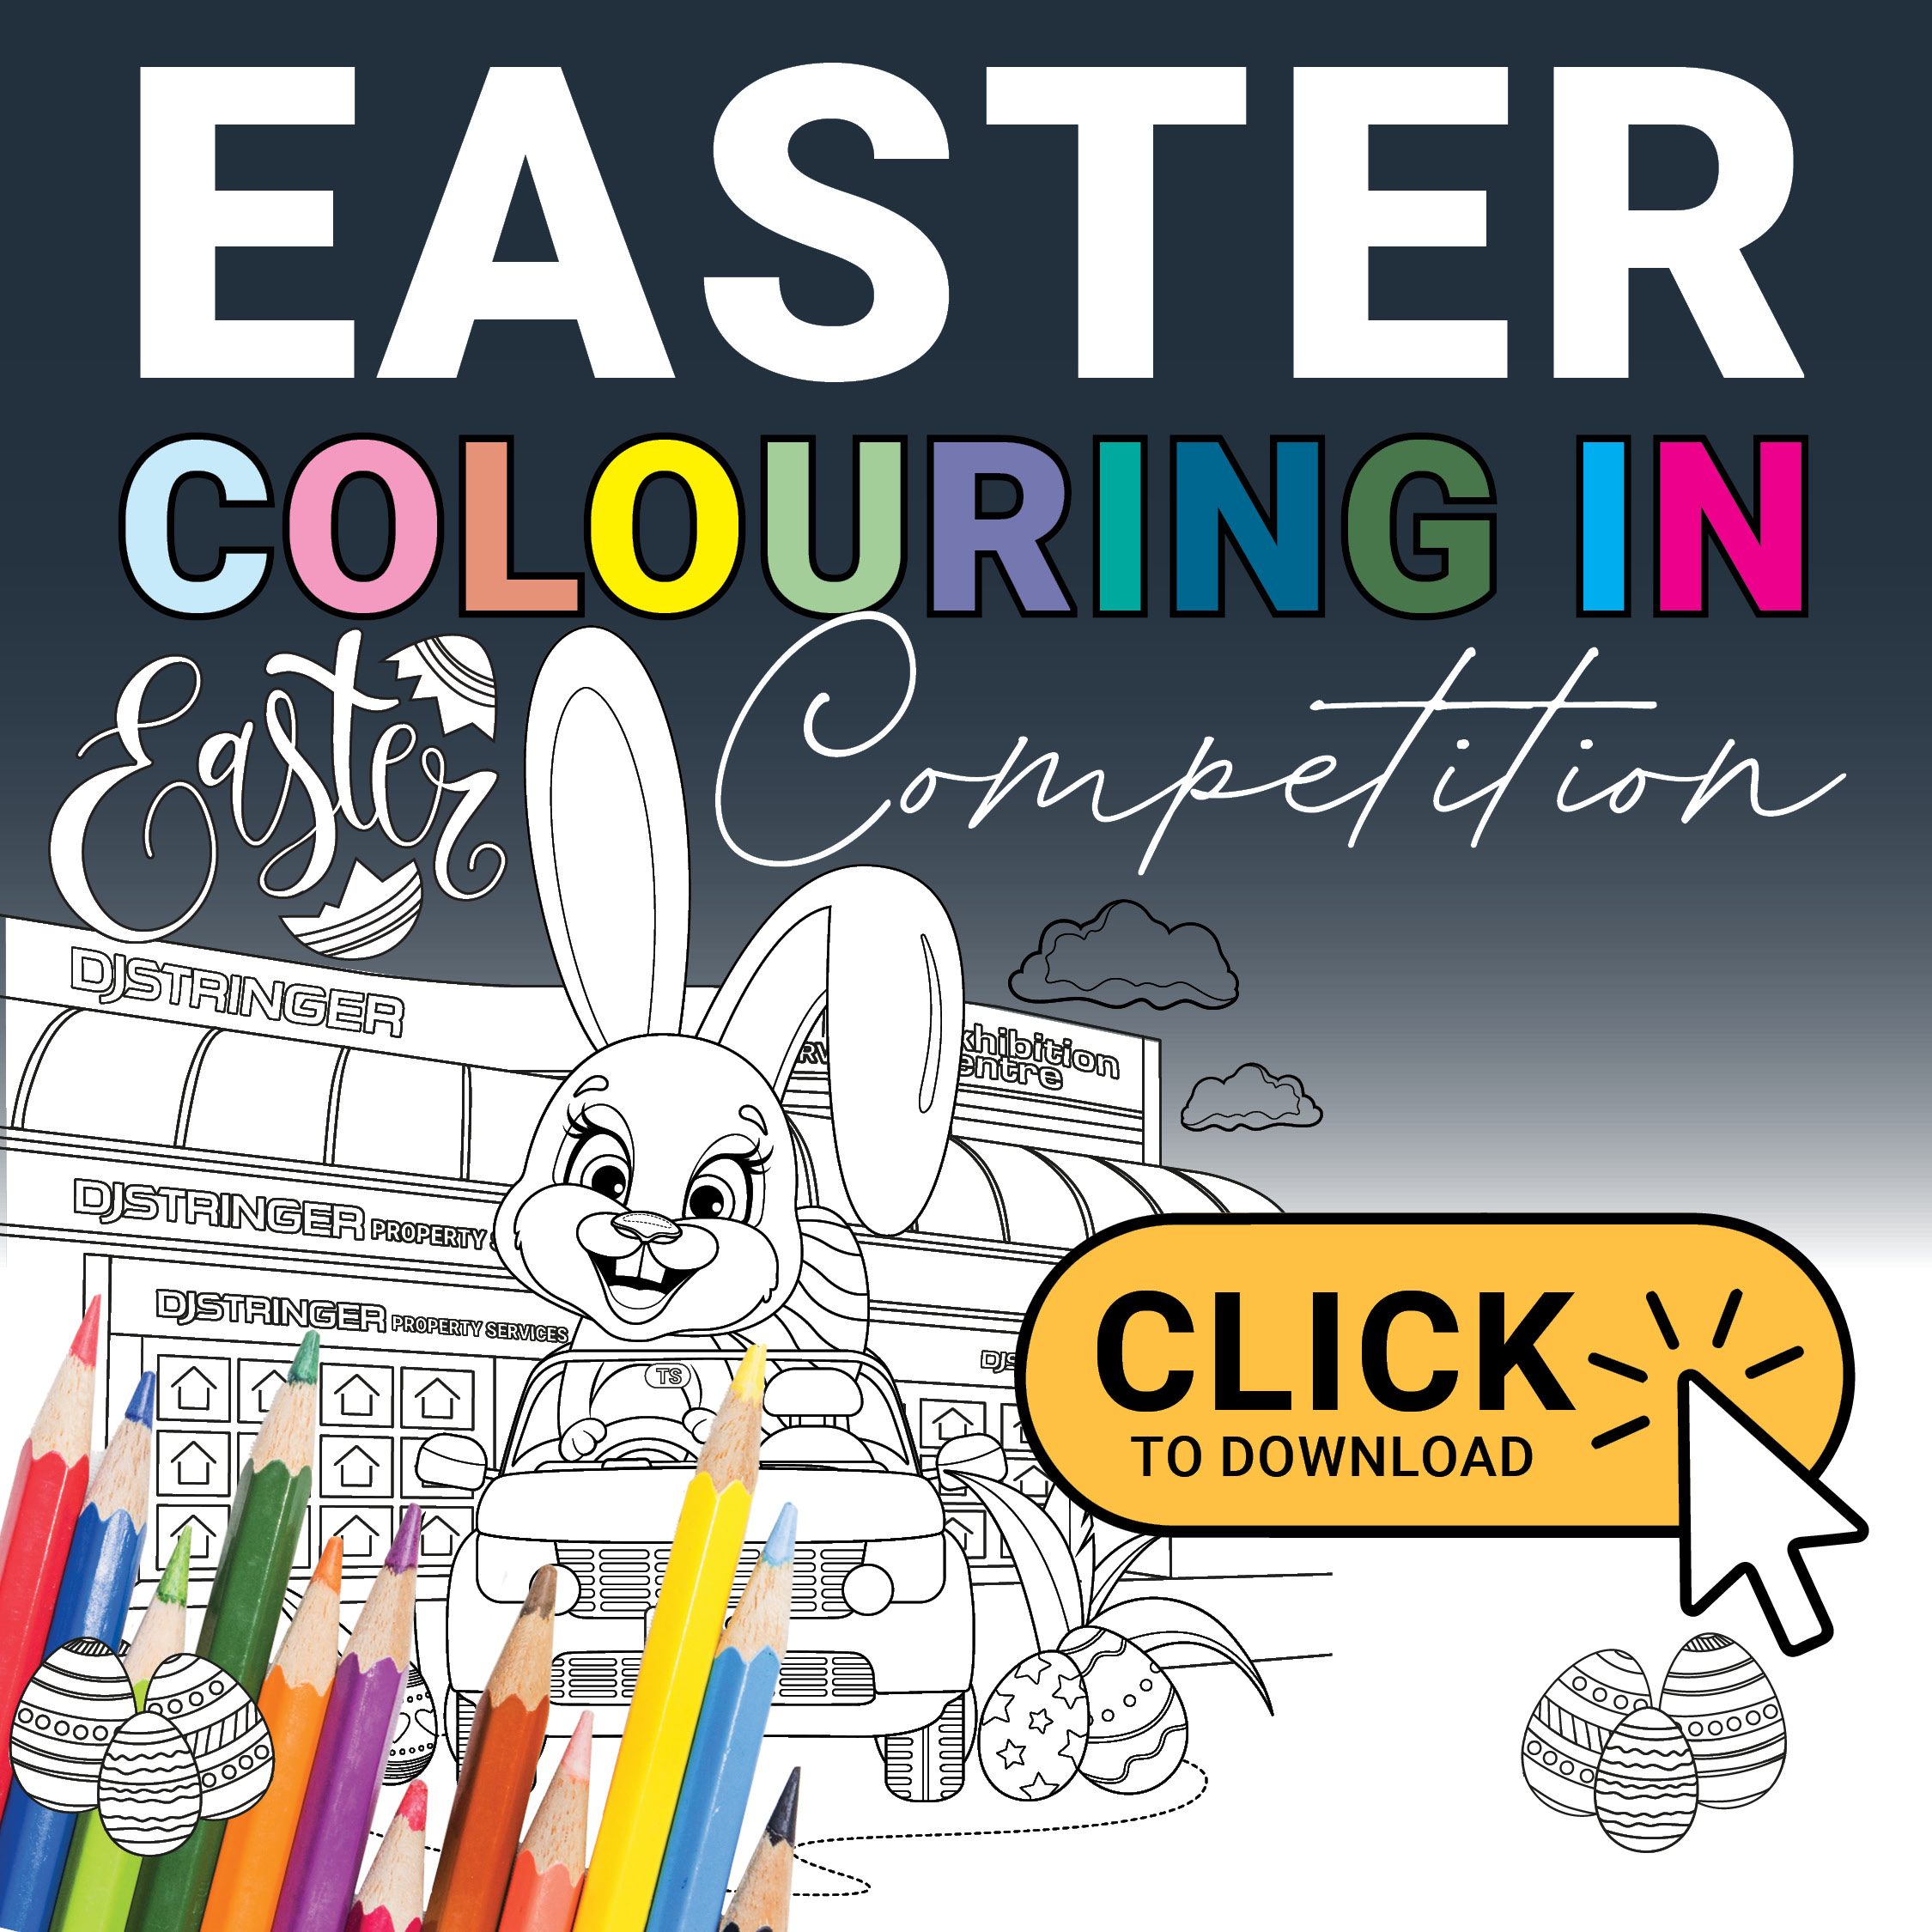 DJ Stringer Colouring in competition is back